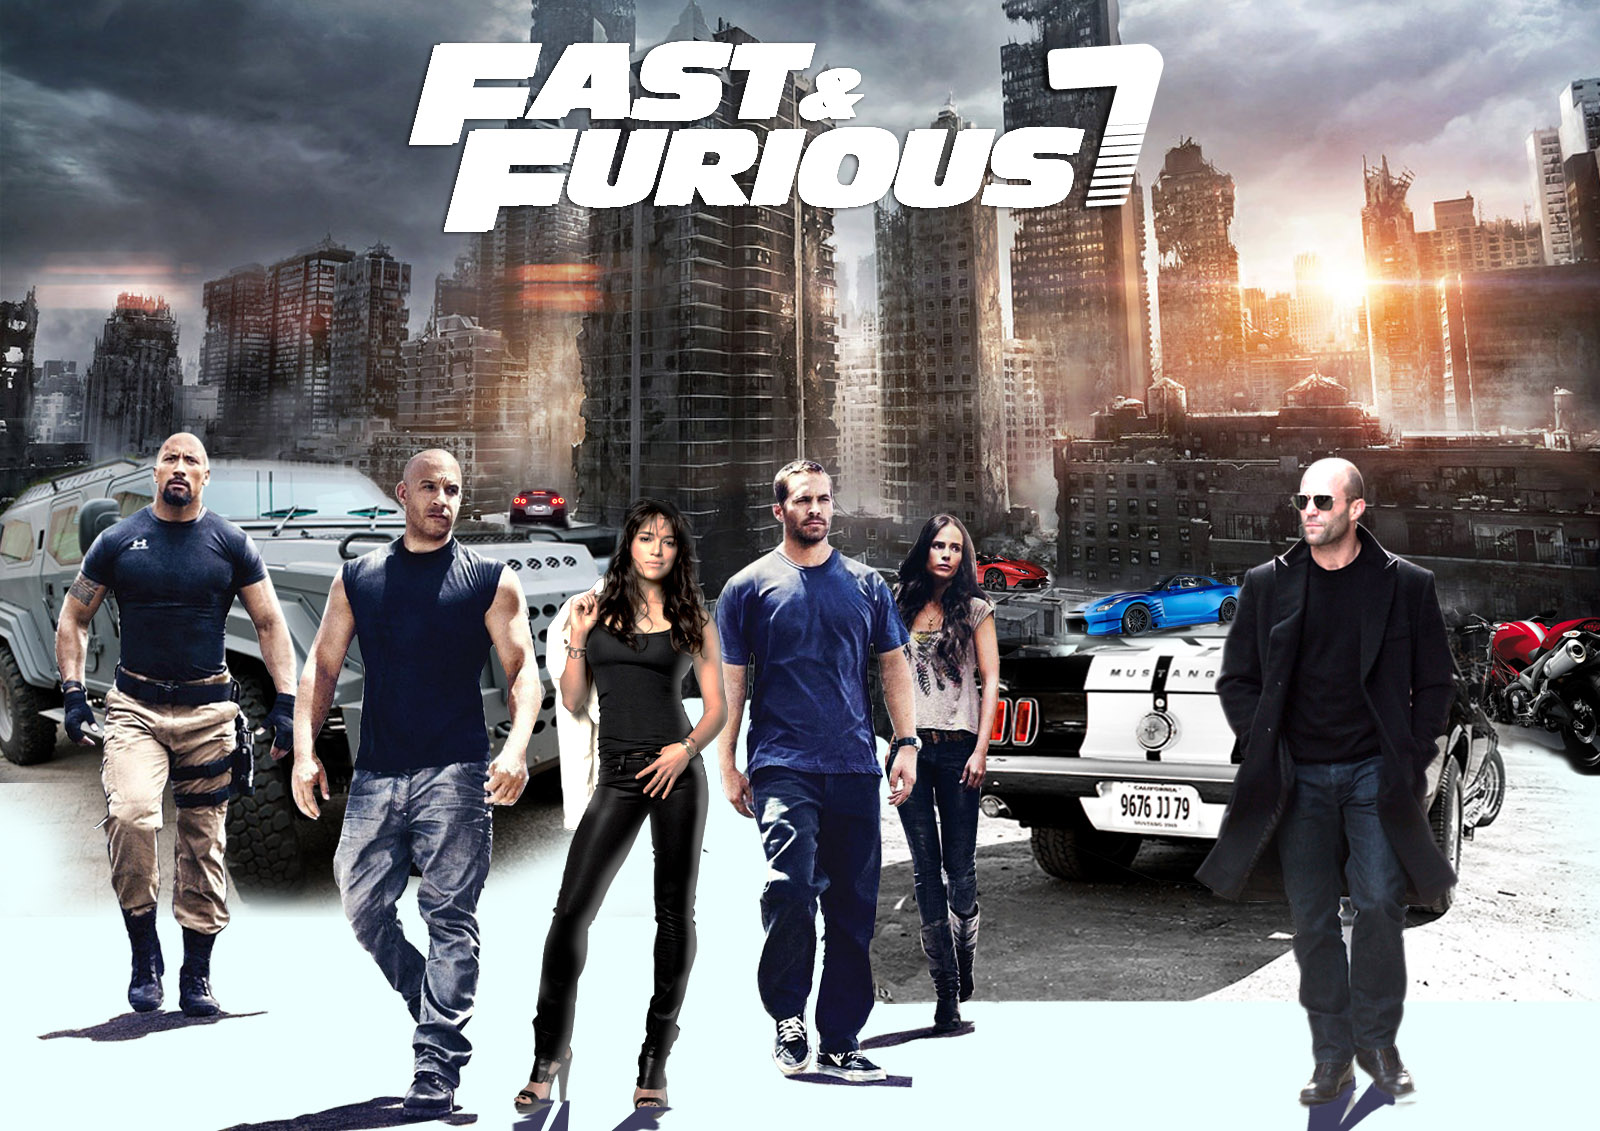 fast-furious-7-over-230-cars-destroyed-on-the-set-mercedesblog